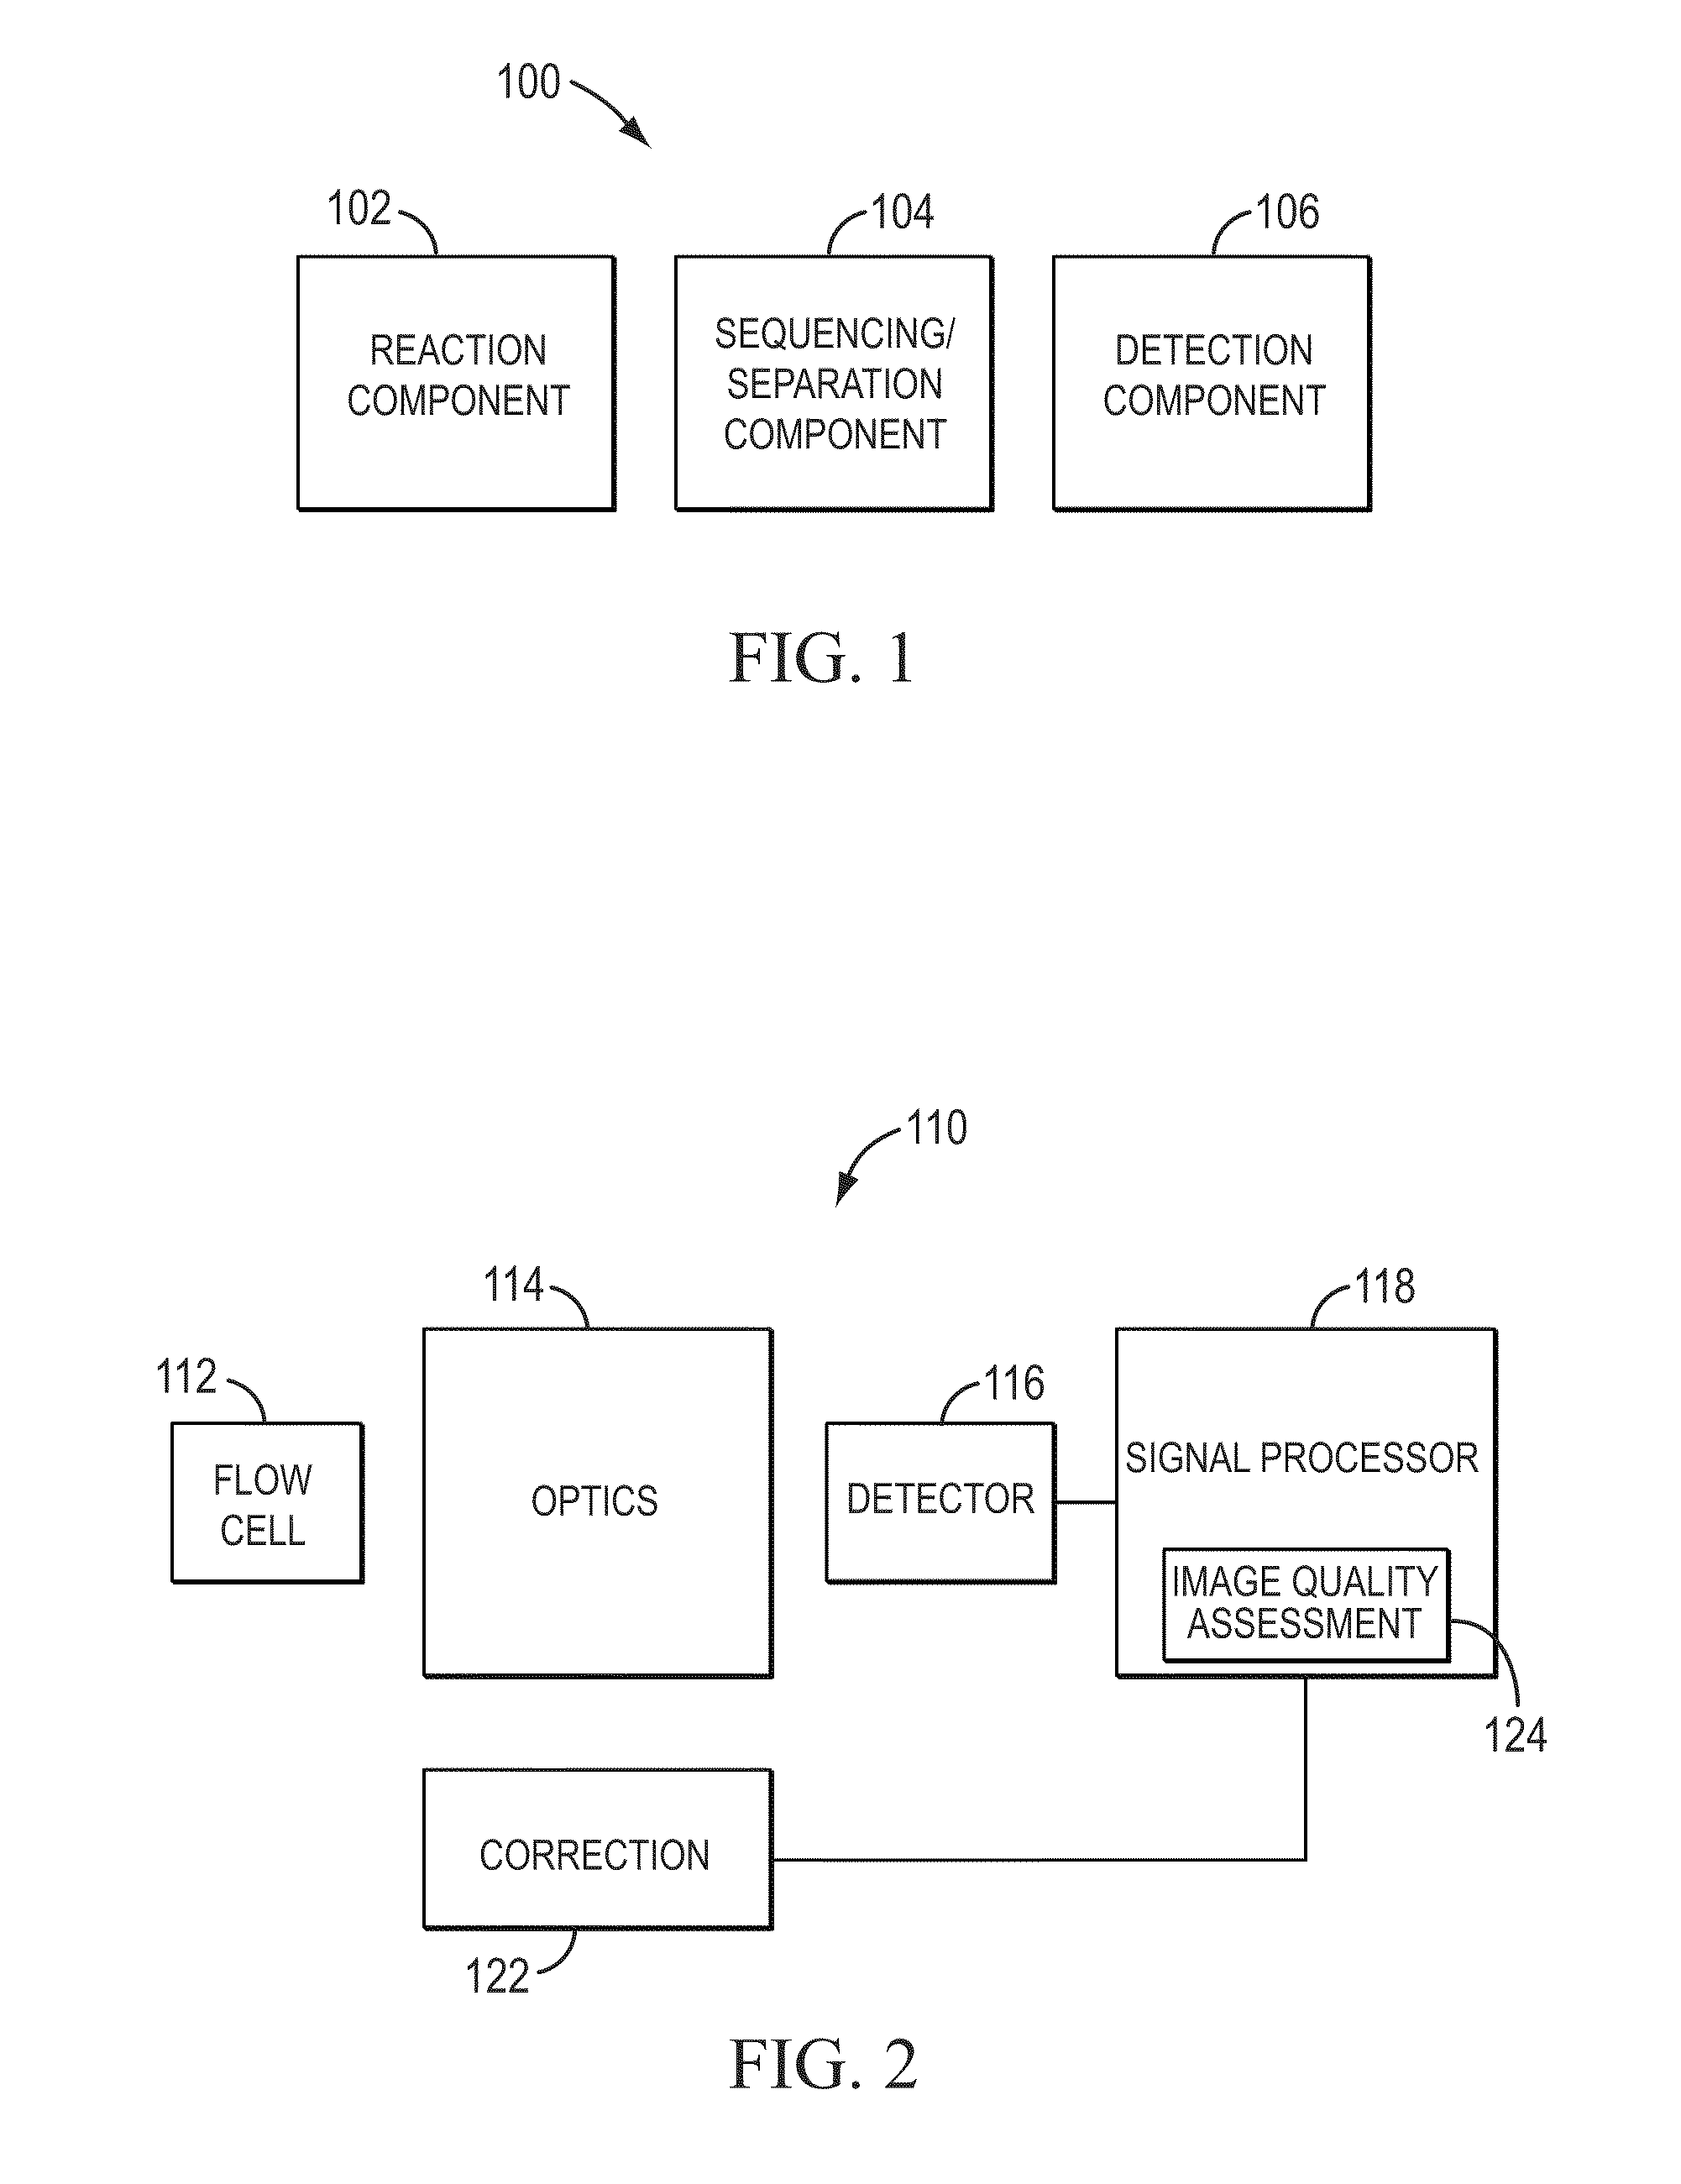 Systems and methods for assessing images